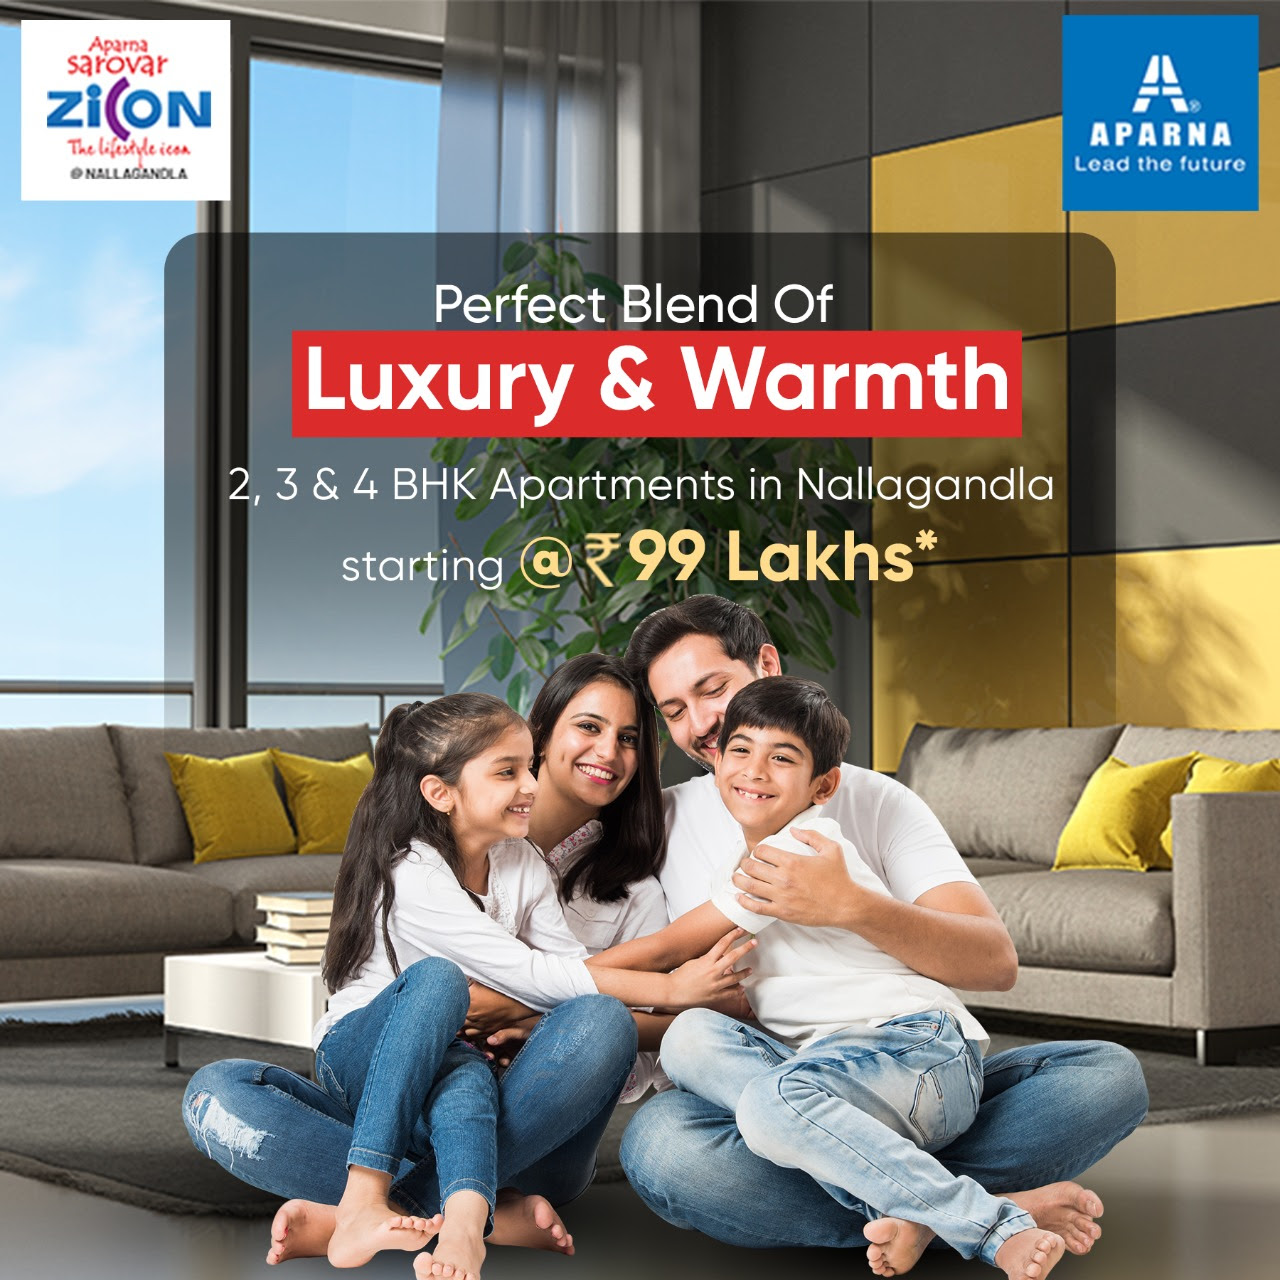 Book 2, 3 and 4 BHK apartments Rs 99 Lac at Aparna Sarovar Zicon, Hyderabad